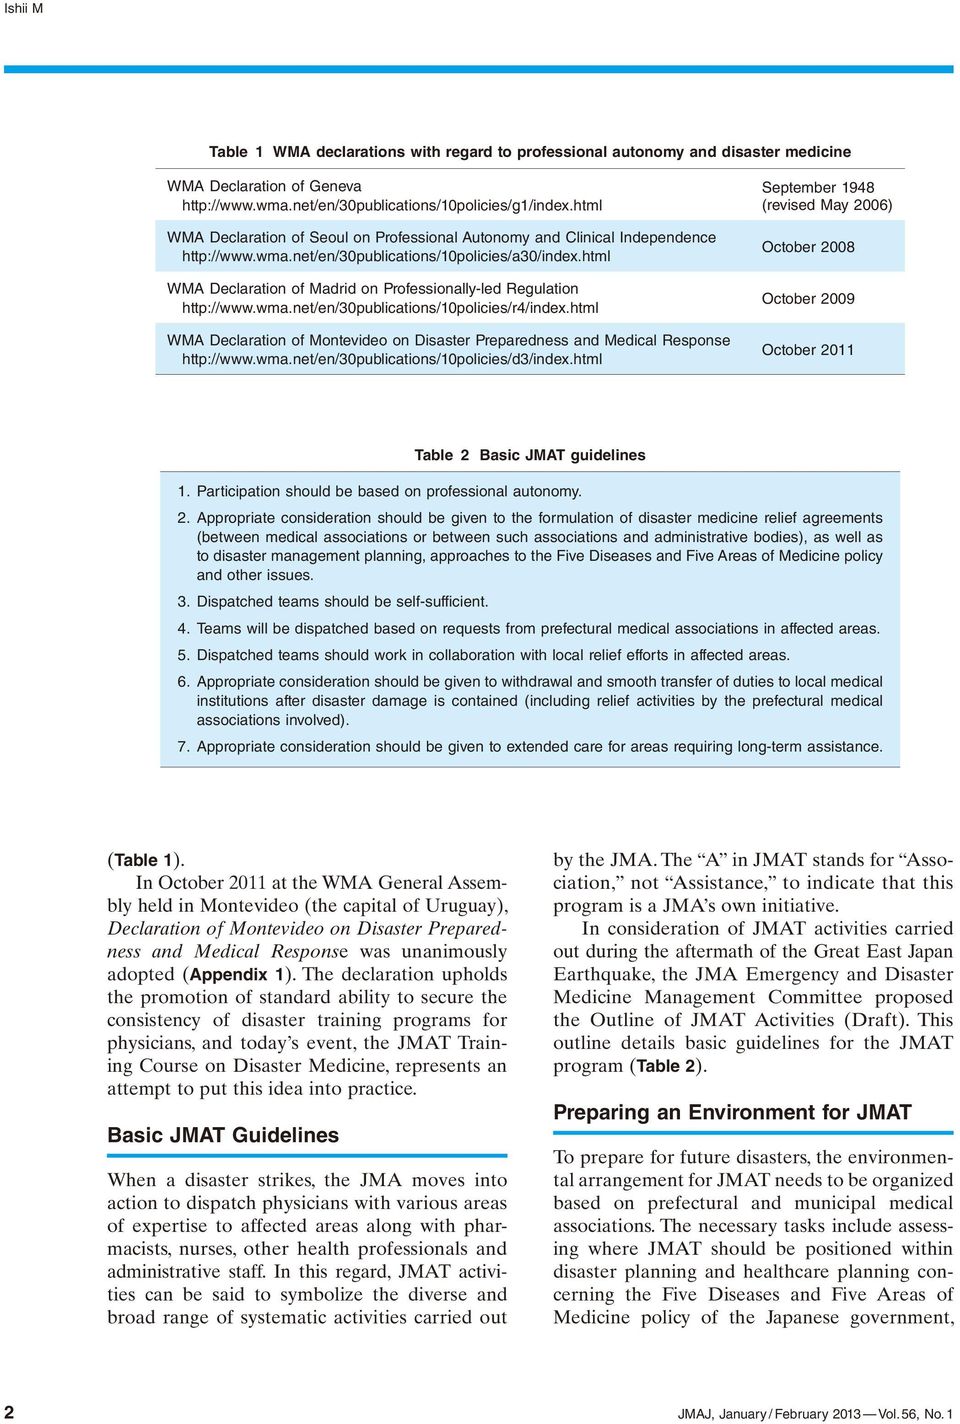 html WMA Declaration of Madrid on Professionally-led Regulation http://www.wma.net/en/30publications/10policies/r4/index.